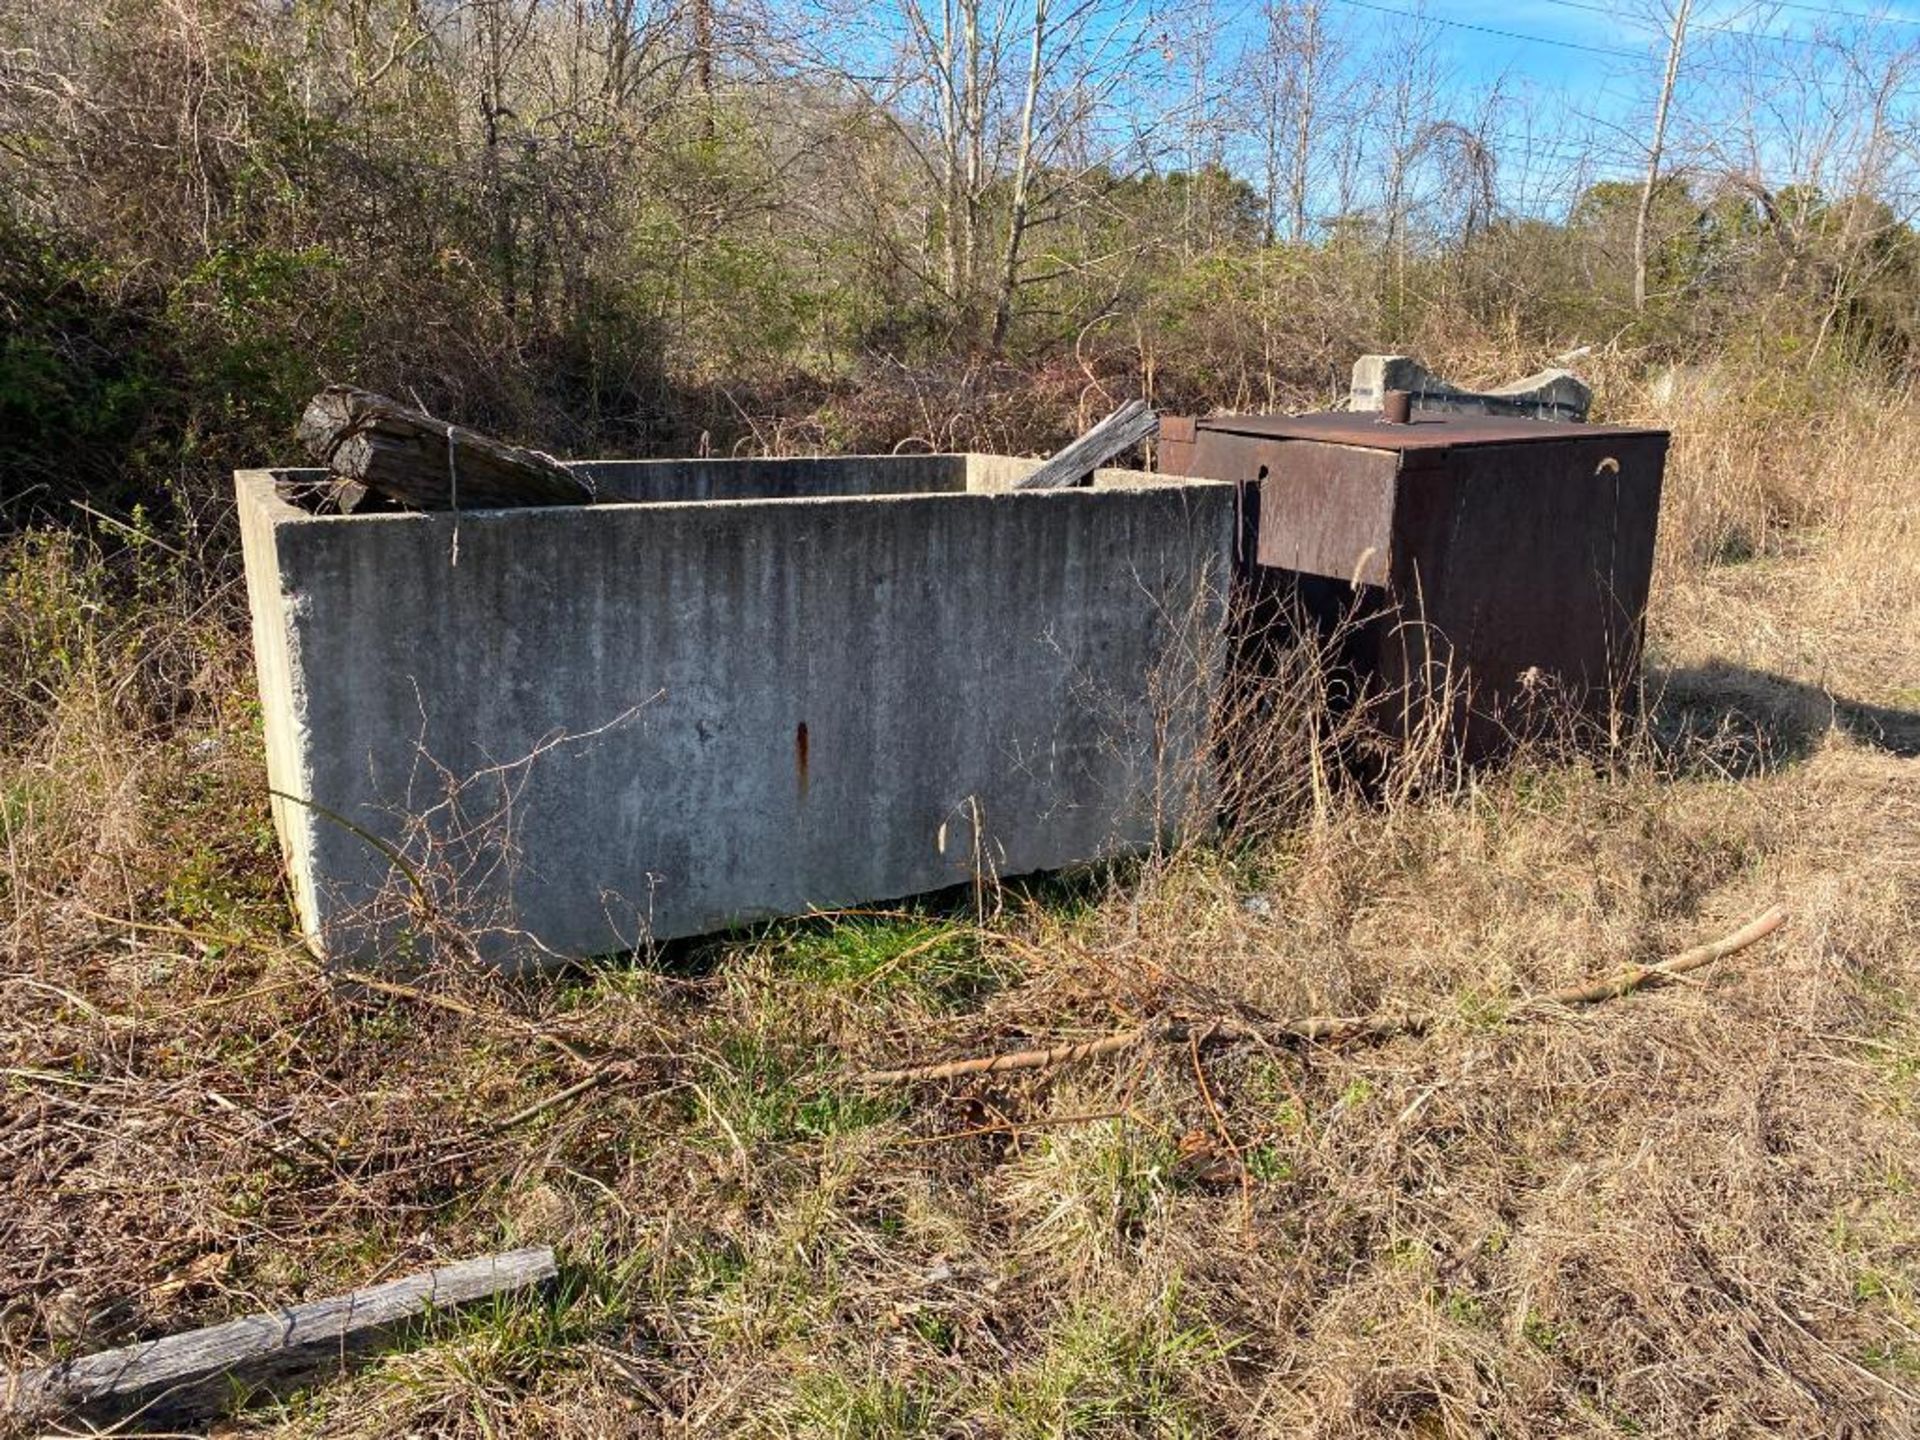 Items In Field: Furnace, Rollers, & Concrete Spill Barriers - Image 3 of 3